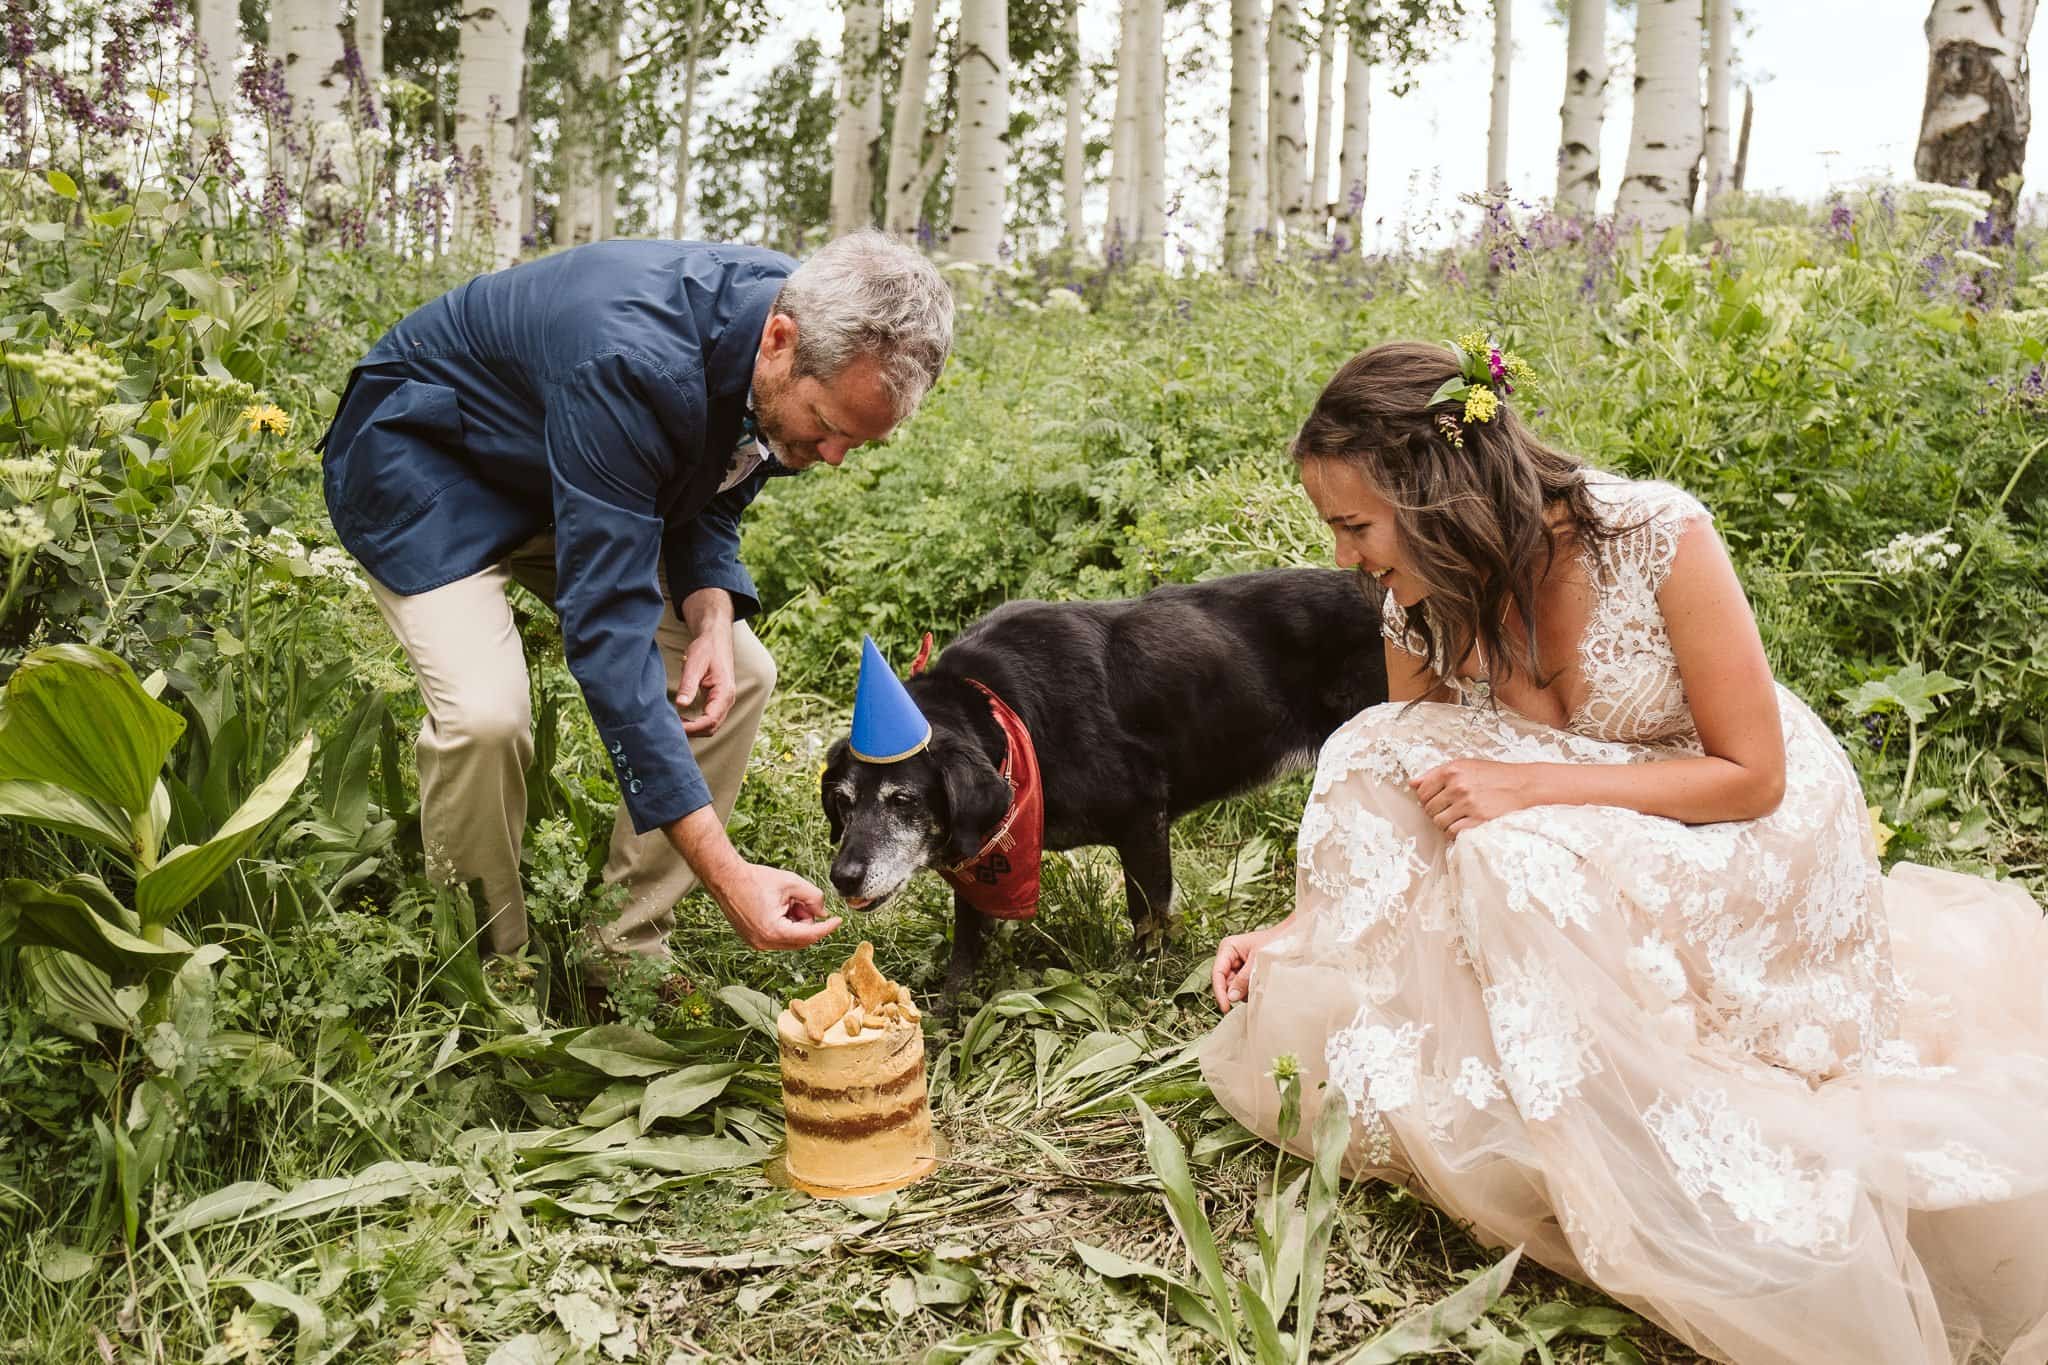 Bride and groom with their dog, dog birthday cake